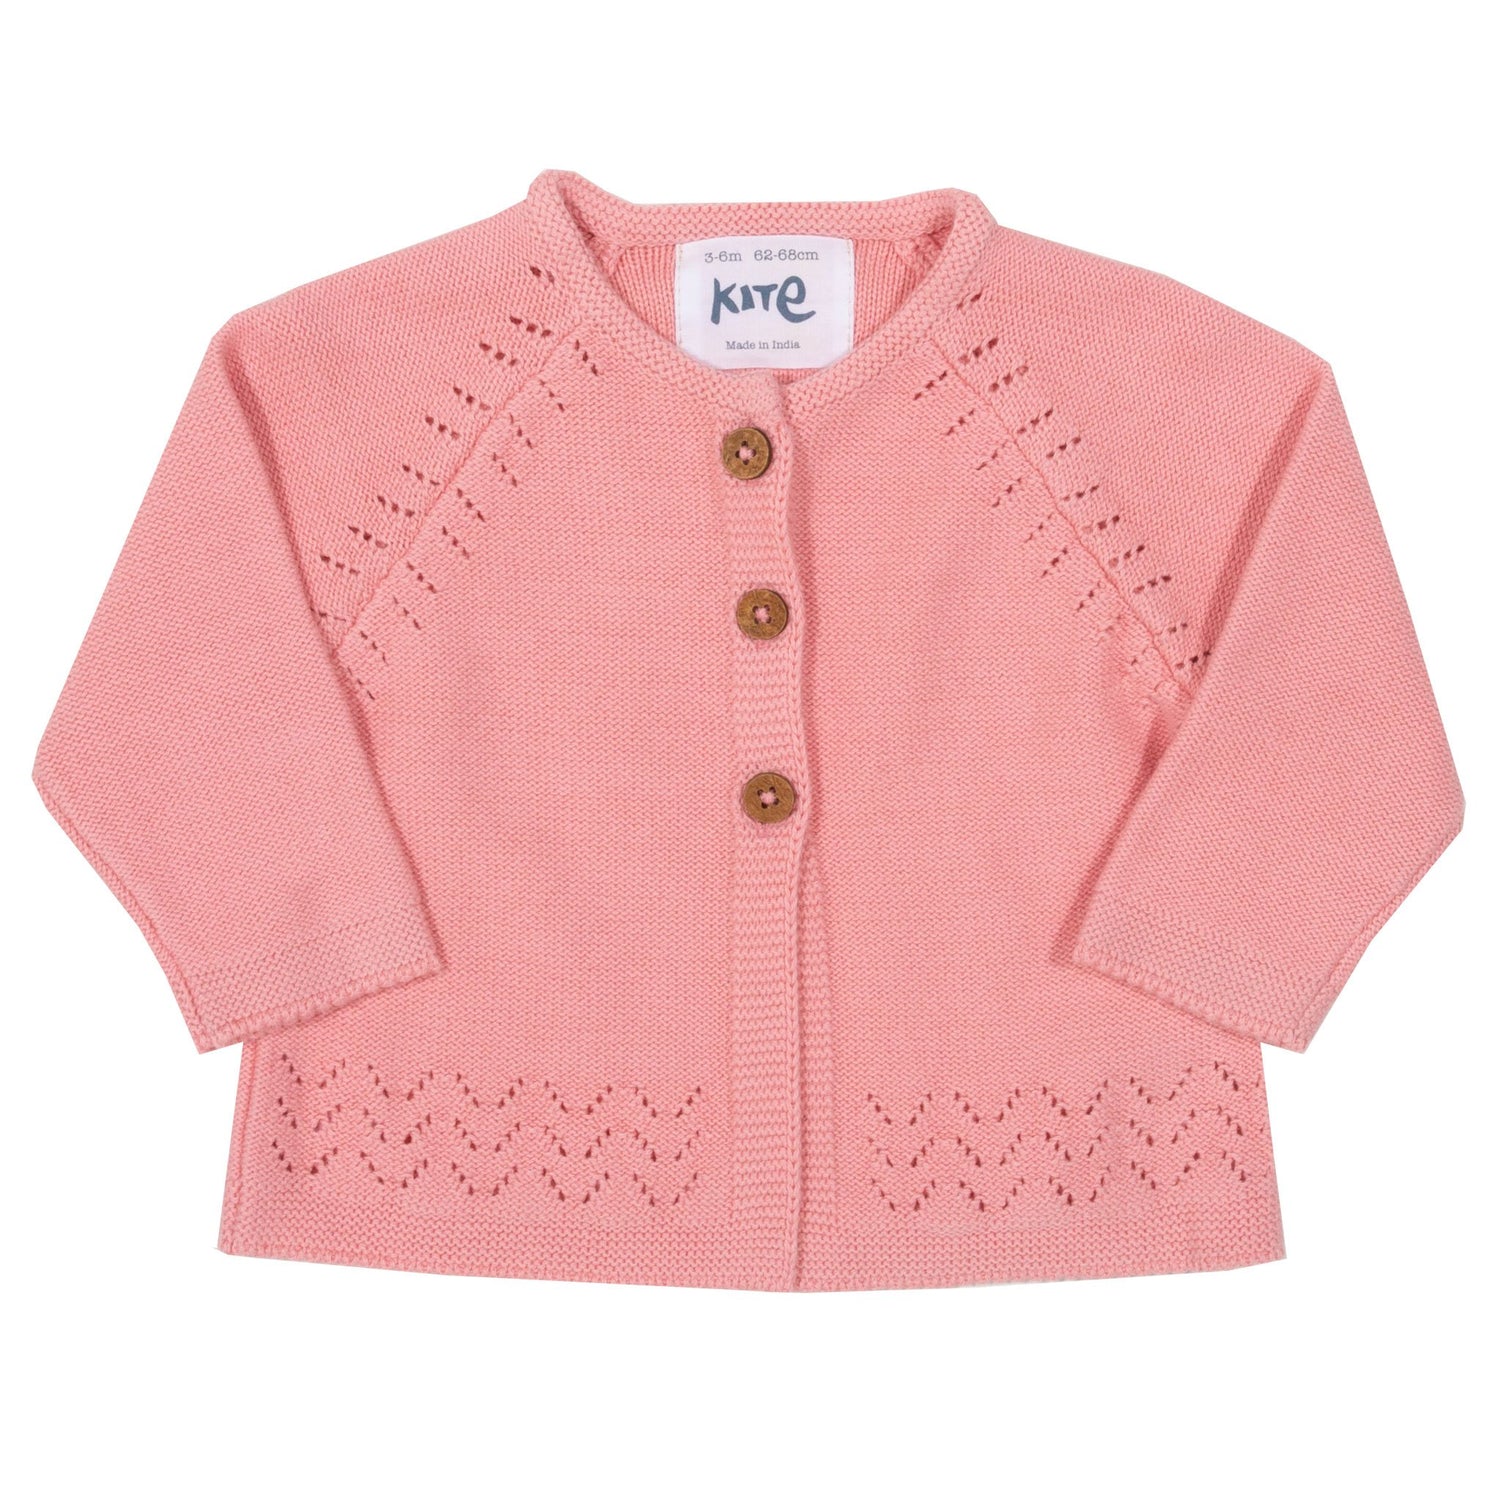 Pink organic cotton cardigan with three buttons